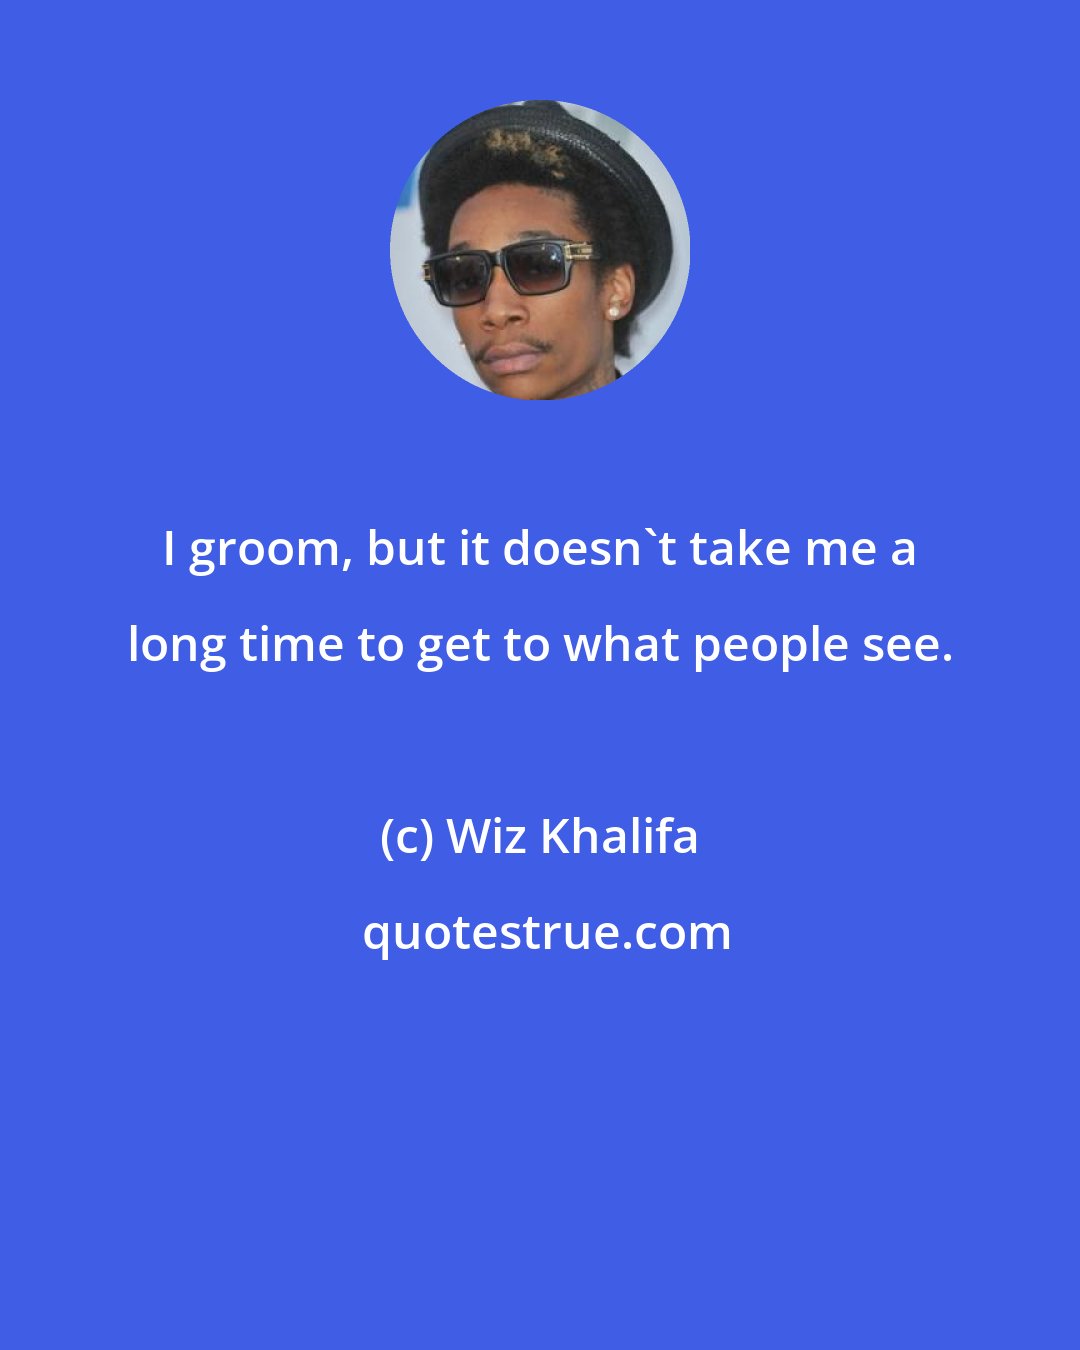 Wiz Khalifa: I groom, but it doesn't take me a long time to get to what people see.